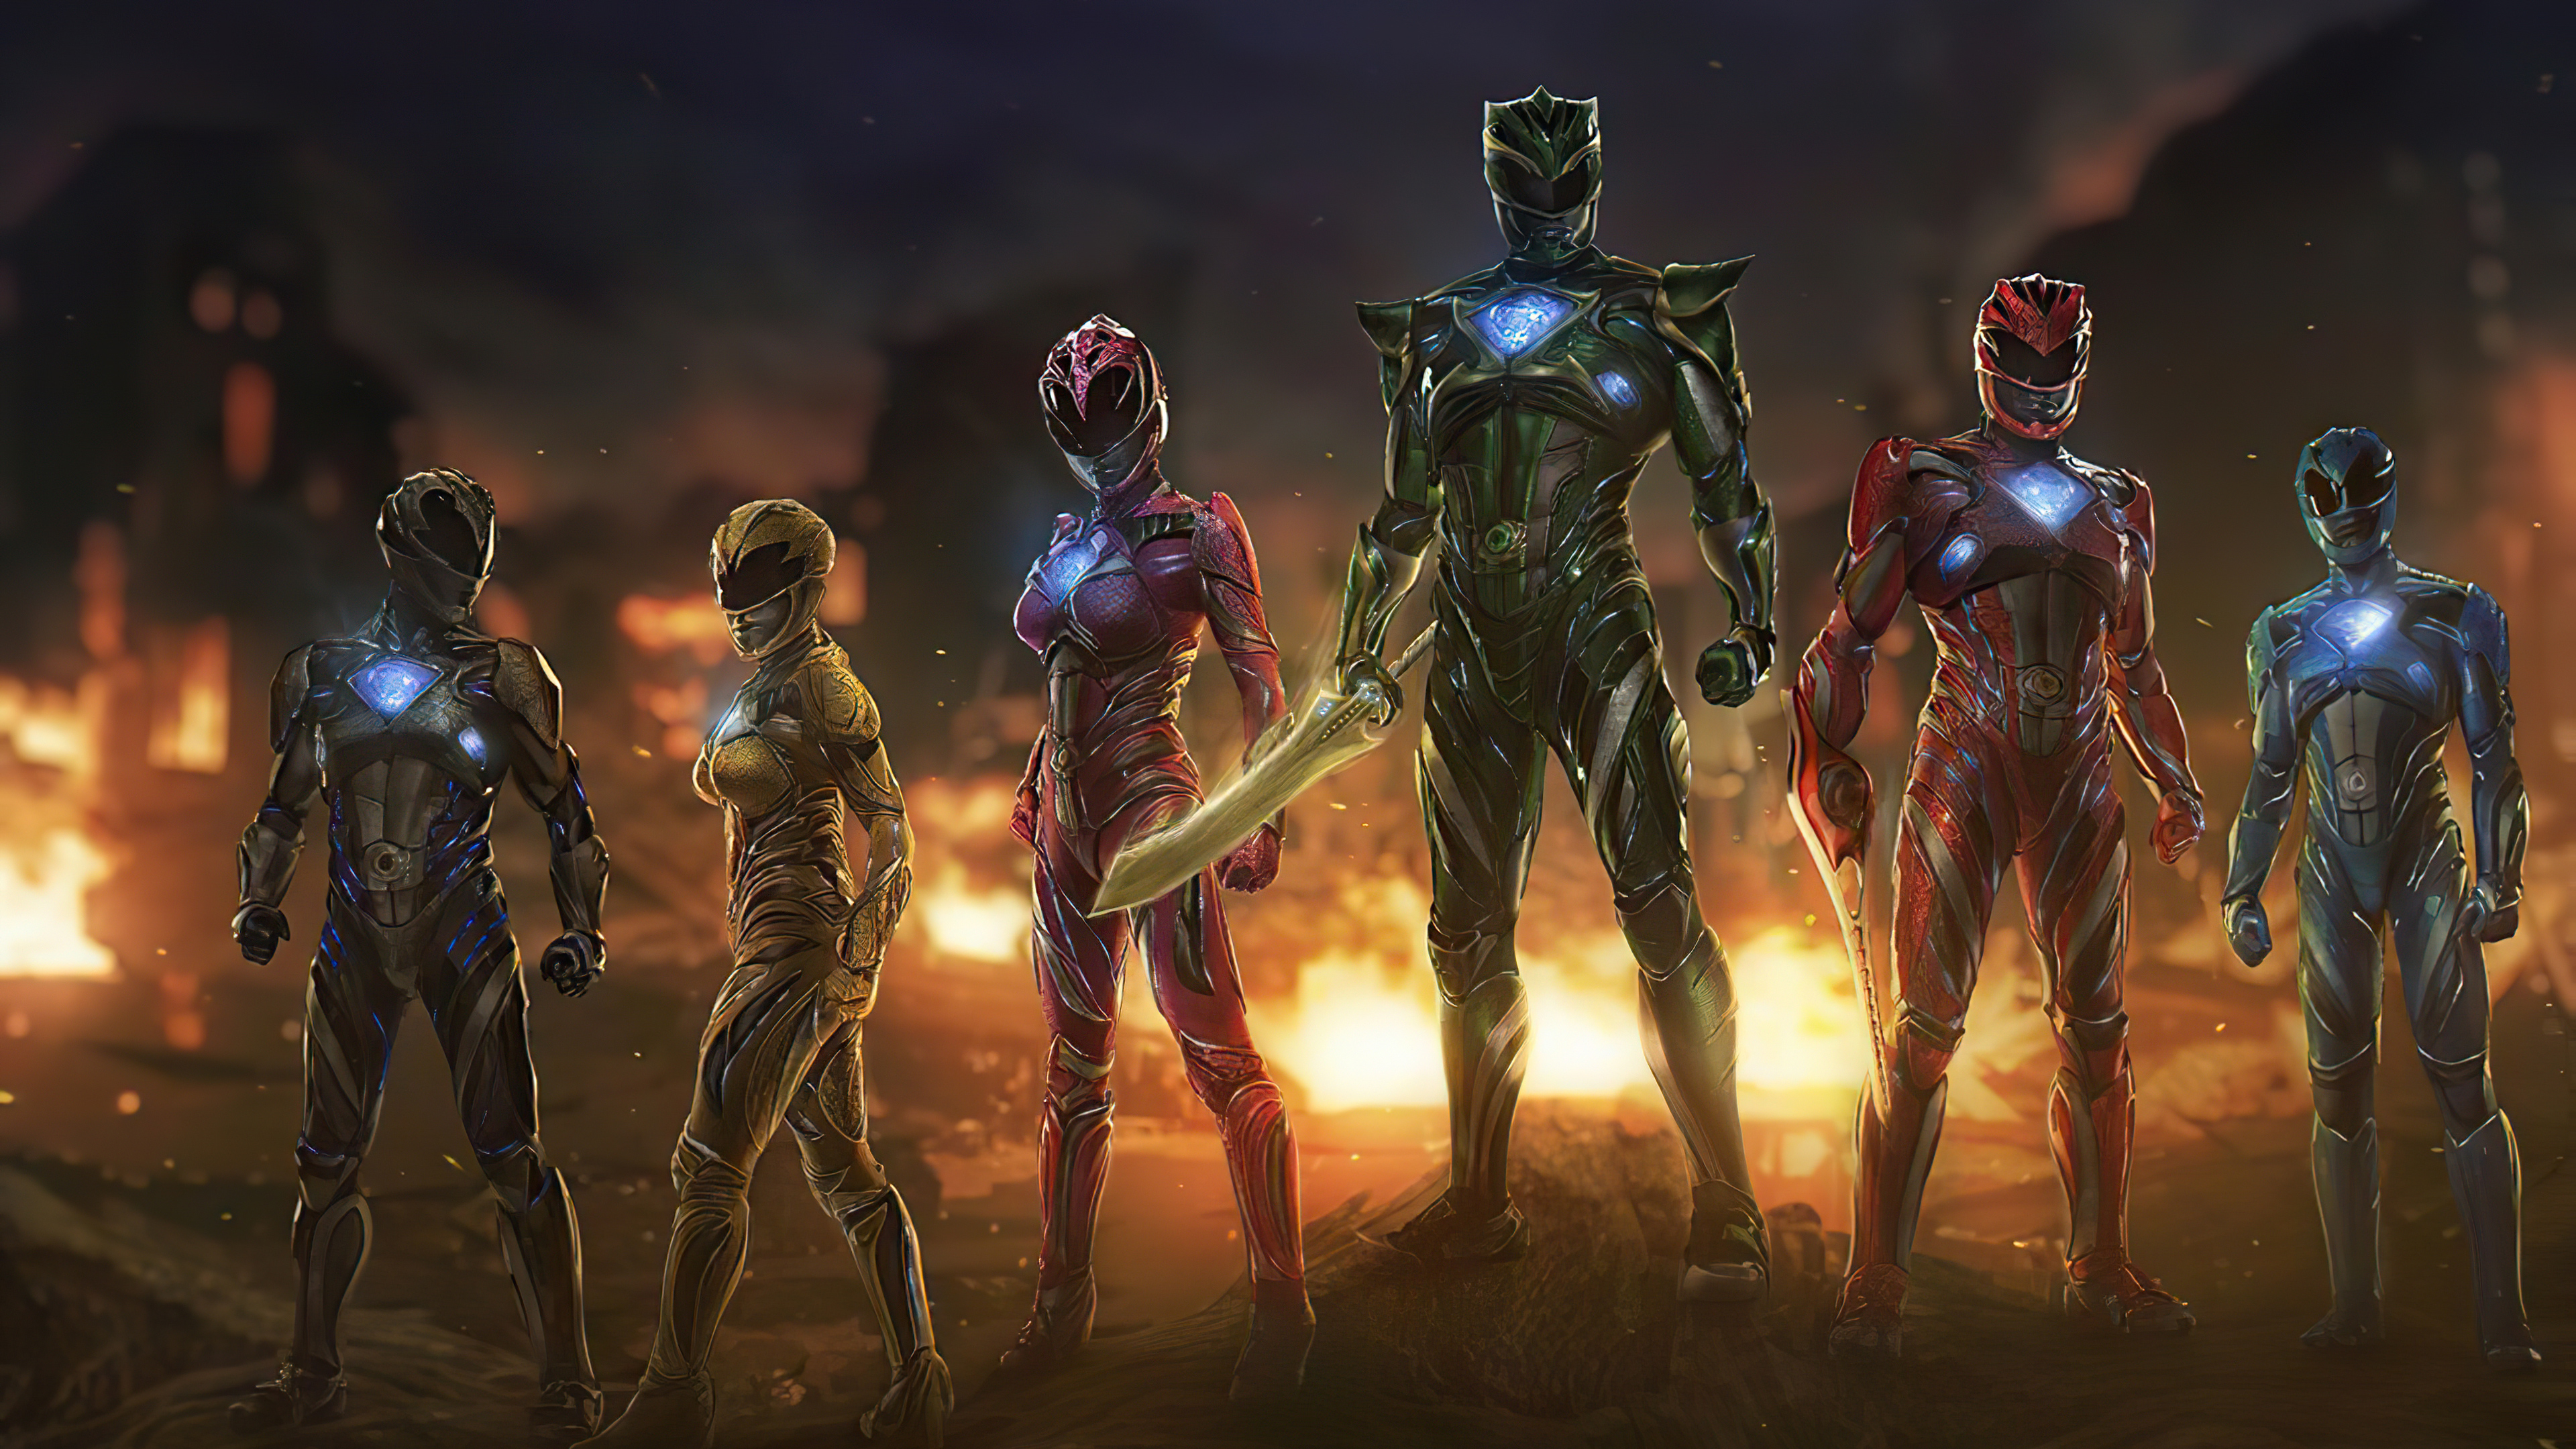 Power Rangers Team Wallpaper Hd Movies 4k Wallpapers Images Photos And Background Wallpapers Den